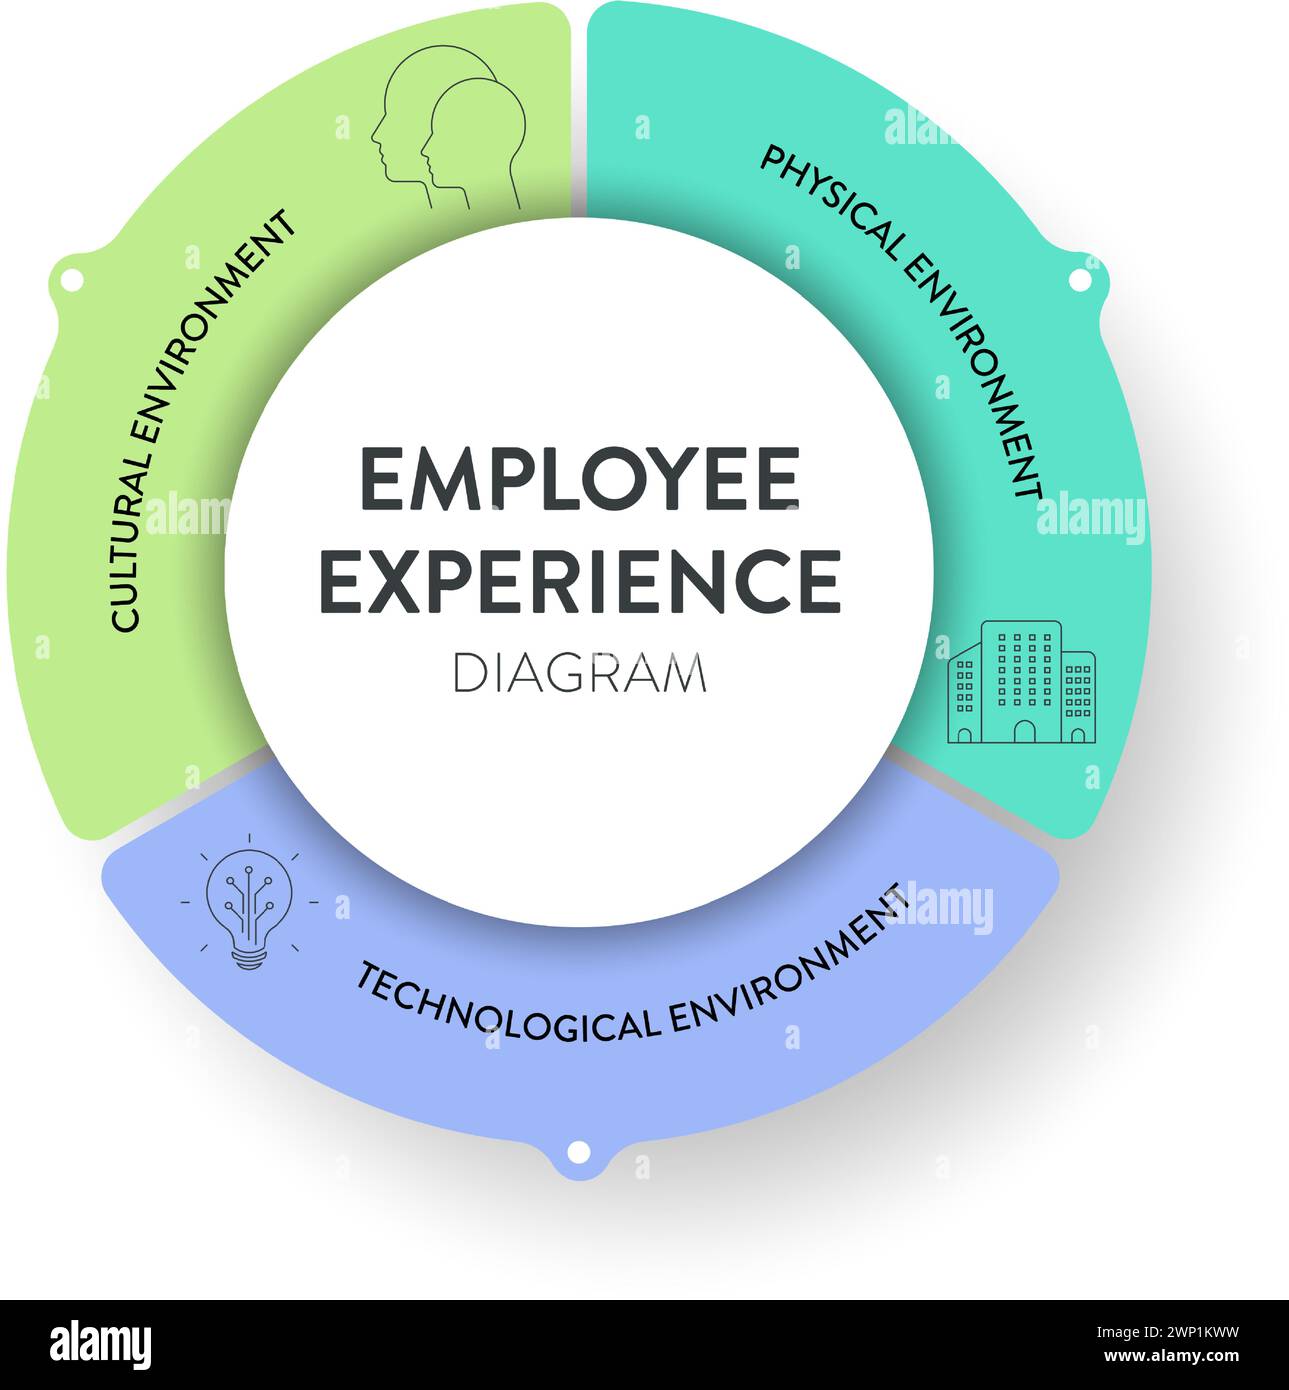 Employee Experience Environments strategy framework infographic diagram chart illustration banner with icon vector template has cultural environment, Stock Vector